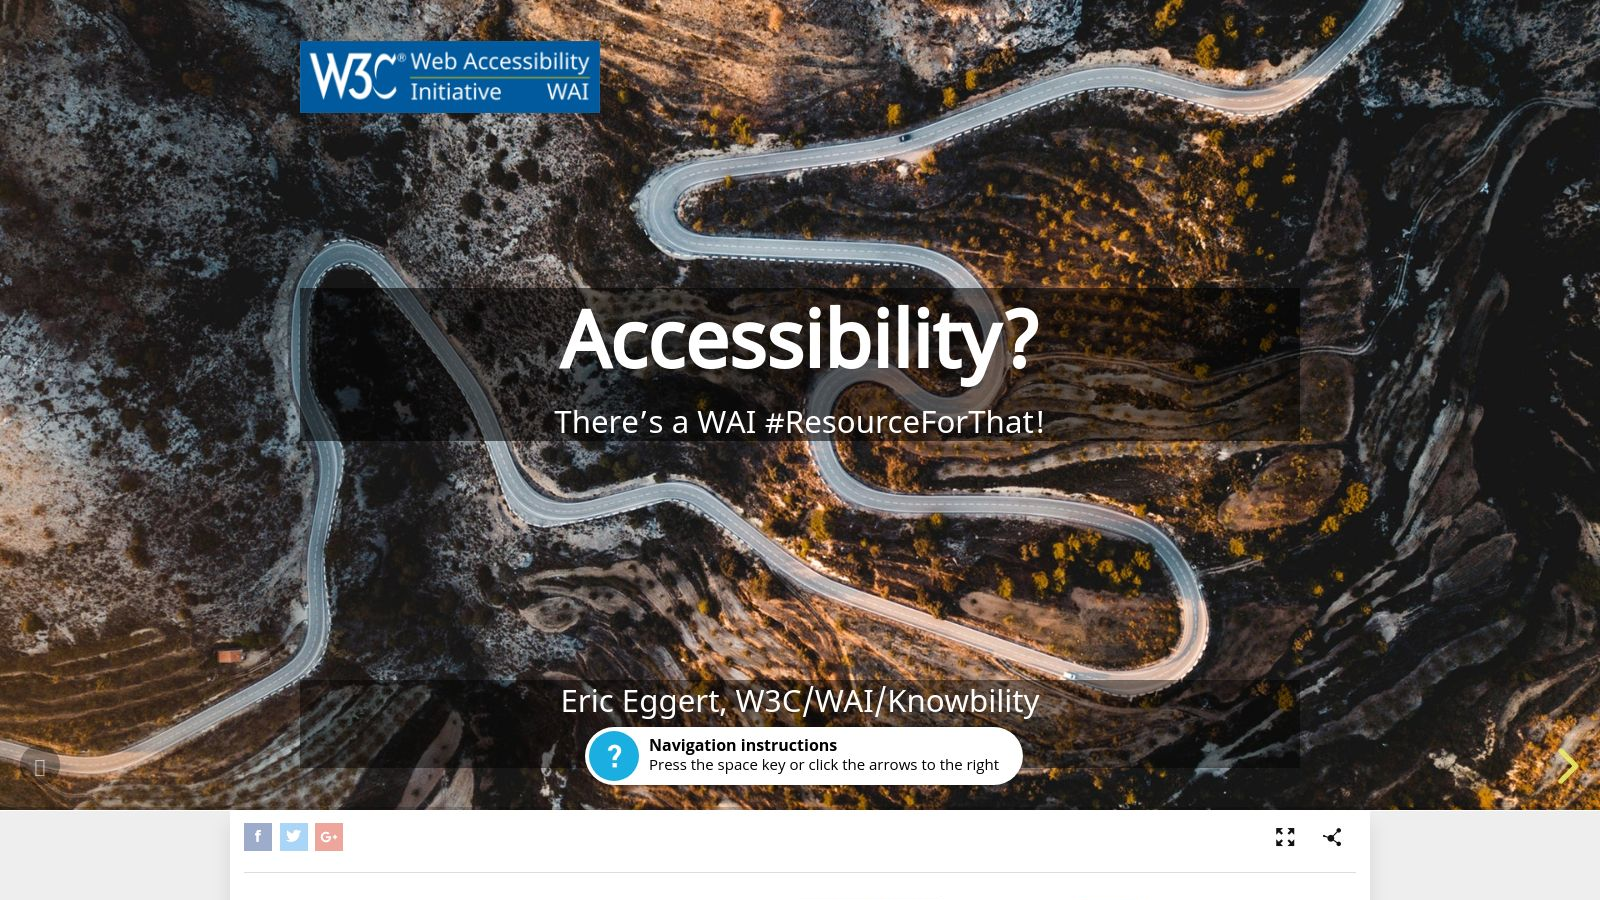 Accessibility? There’s a WAI #ResourceForThat!